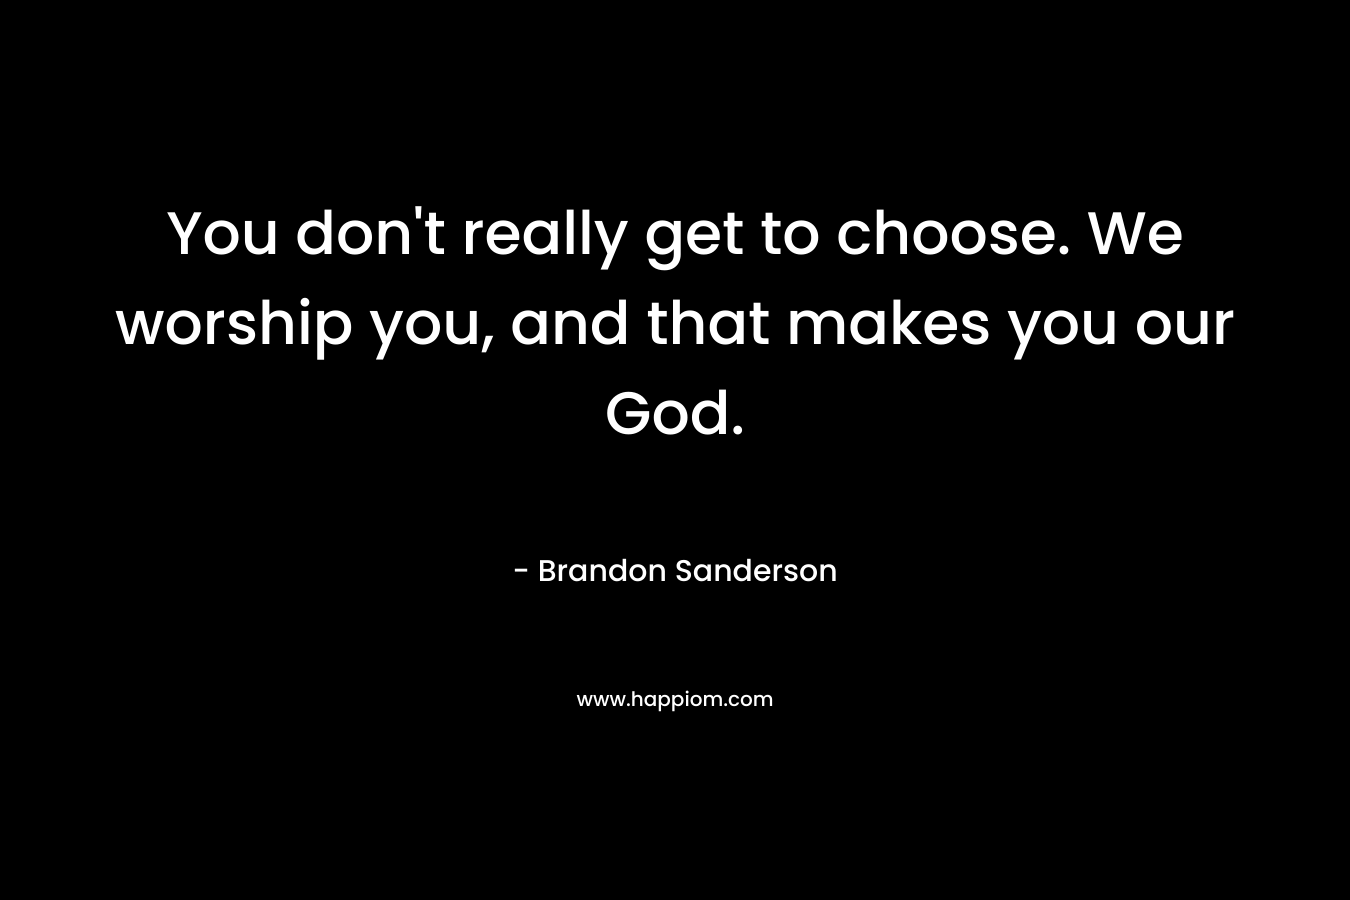 You don't really get to choose. We worship you, and that makes you our God.